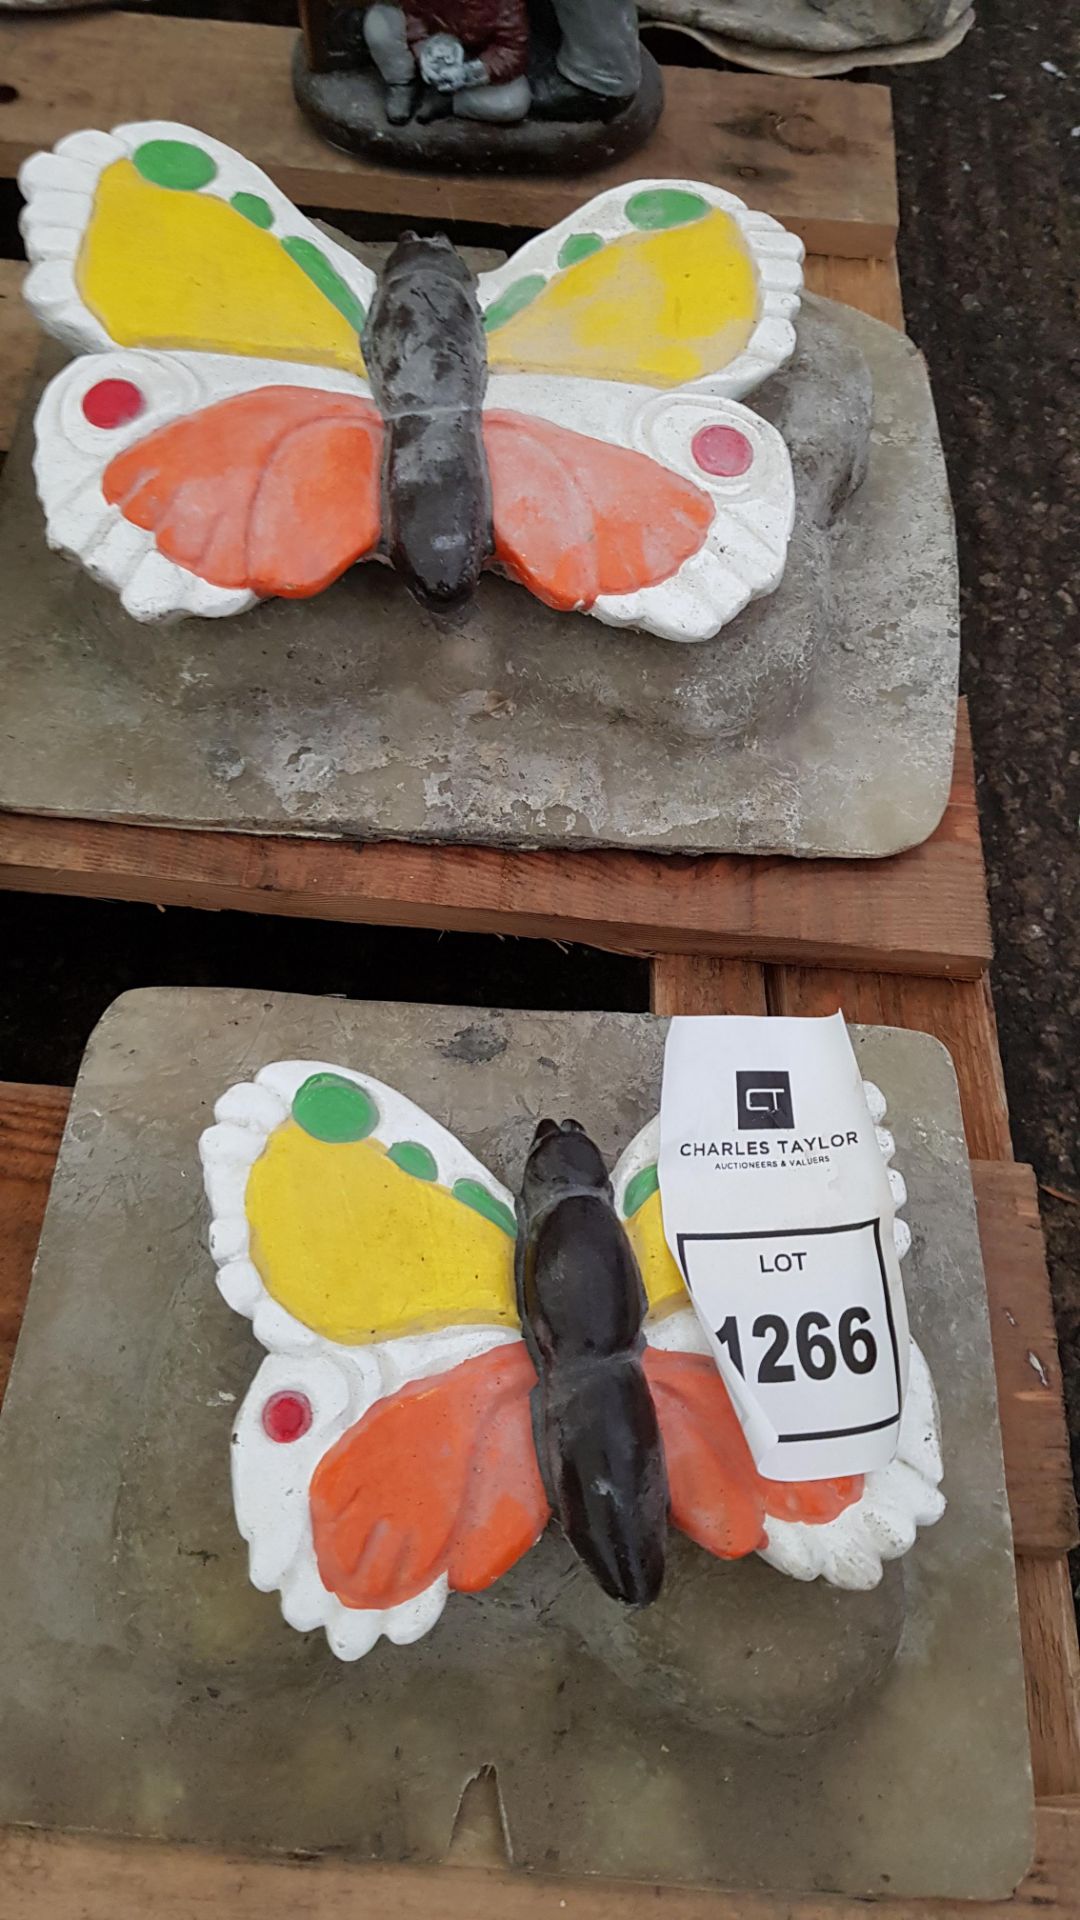 2 X GARDEN ORNAMENTS I.E BUTTERFLY WITH FIBRE GLASS MOULDS AND LATEX SLIPS-(20 X18CM)